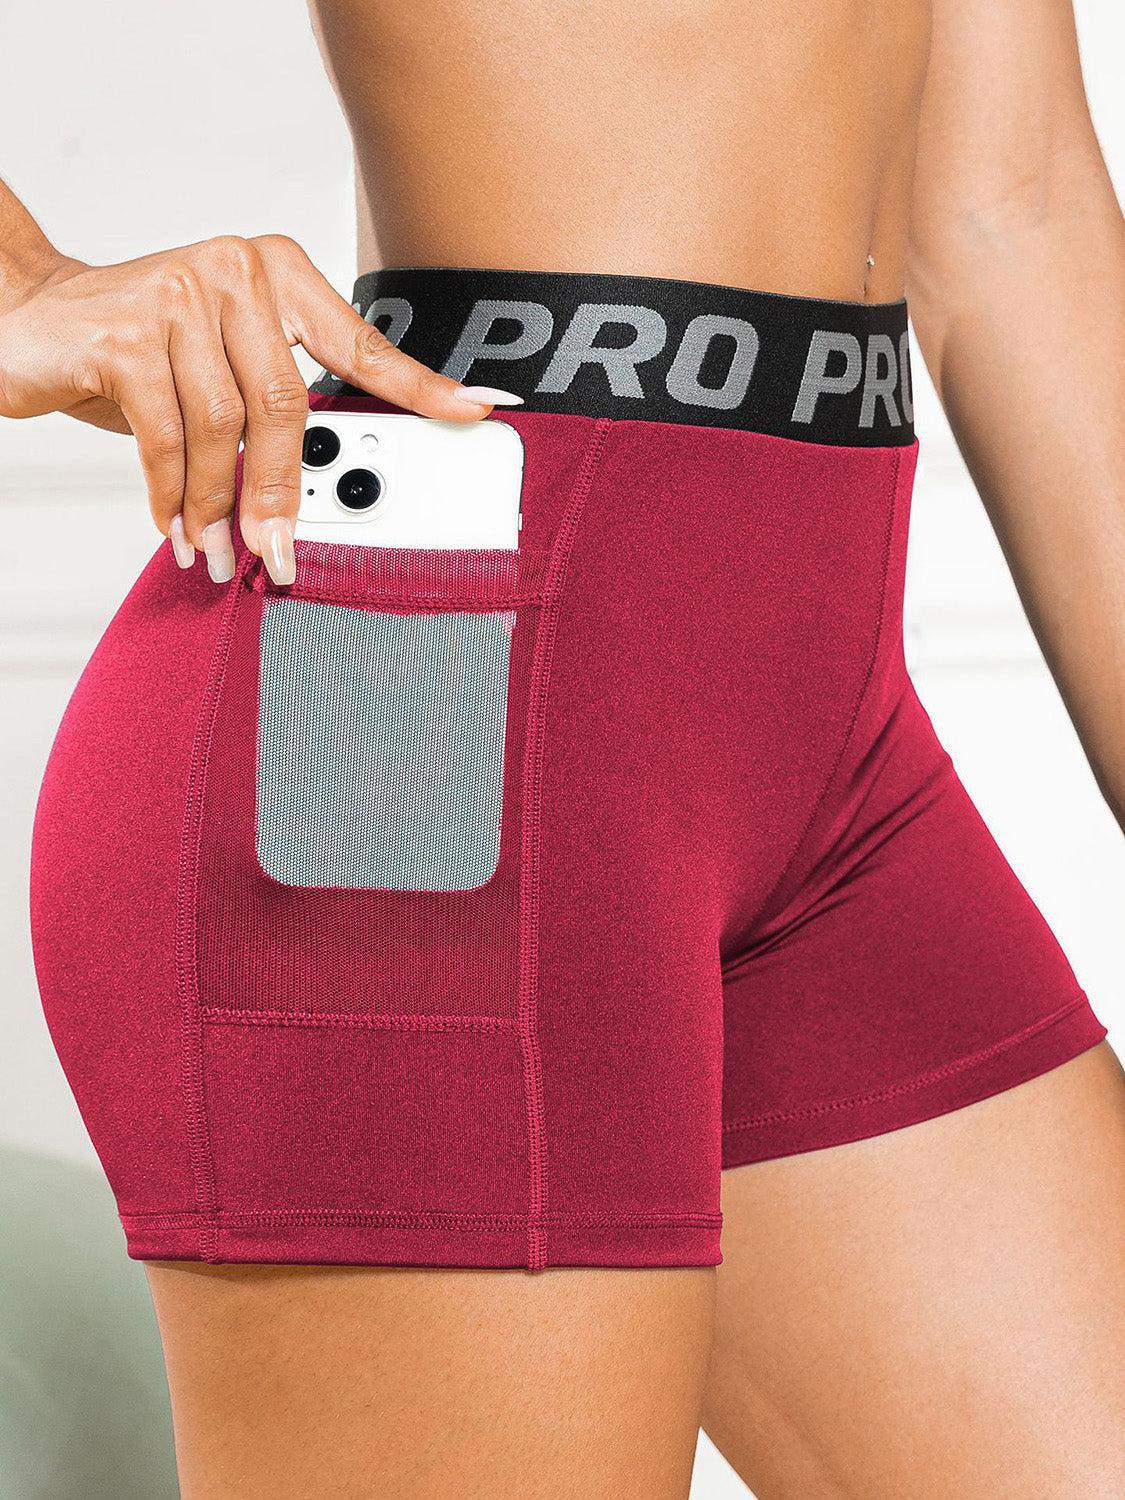 a woman in red shorts holding a cell phone